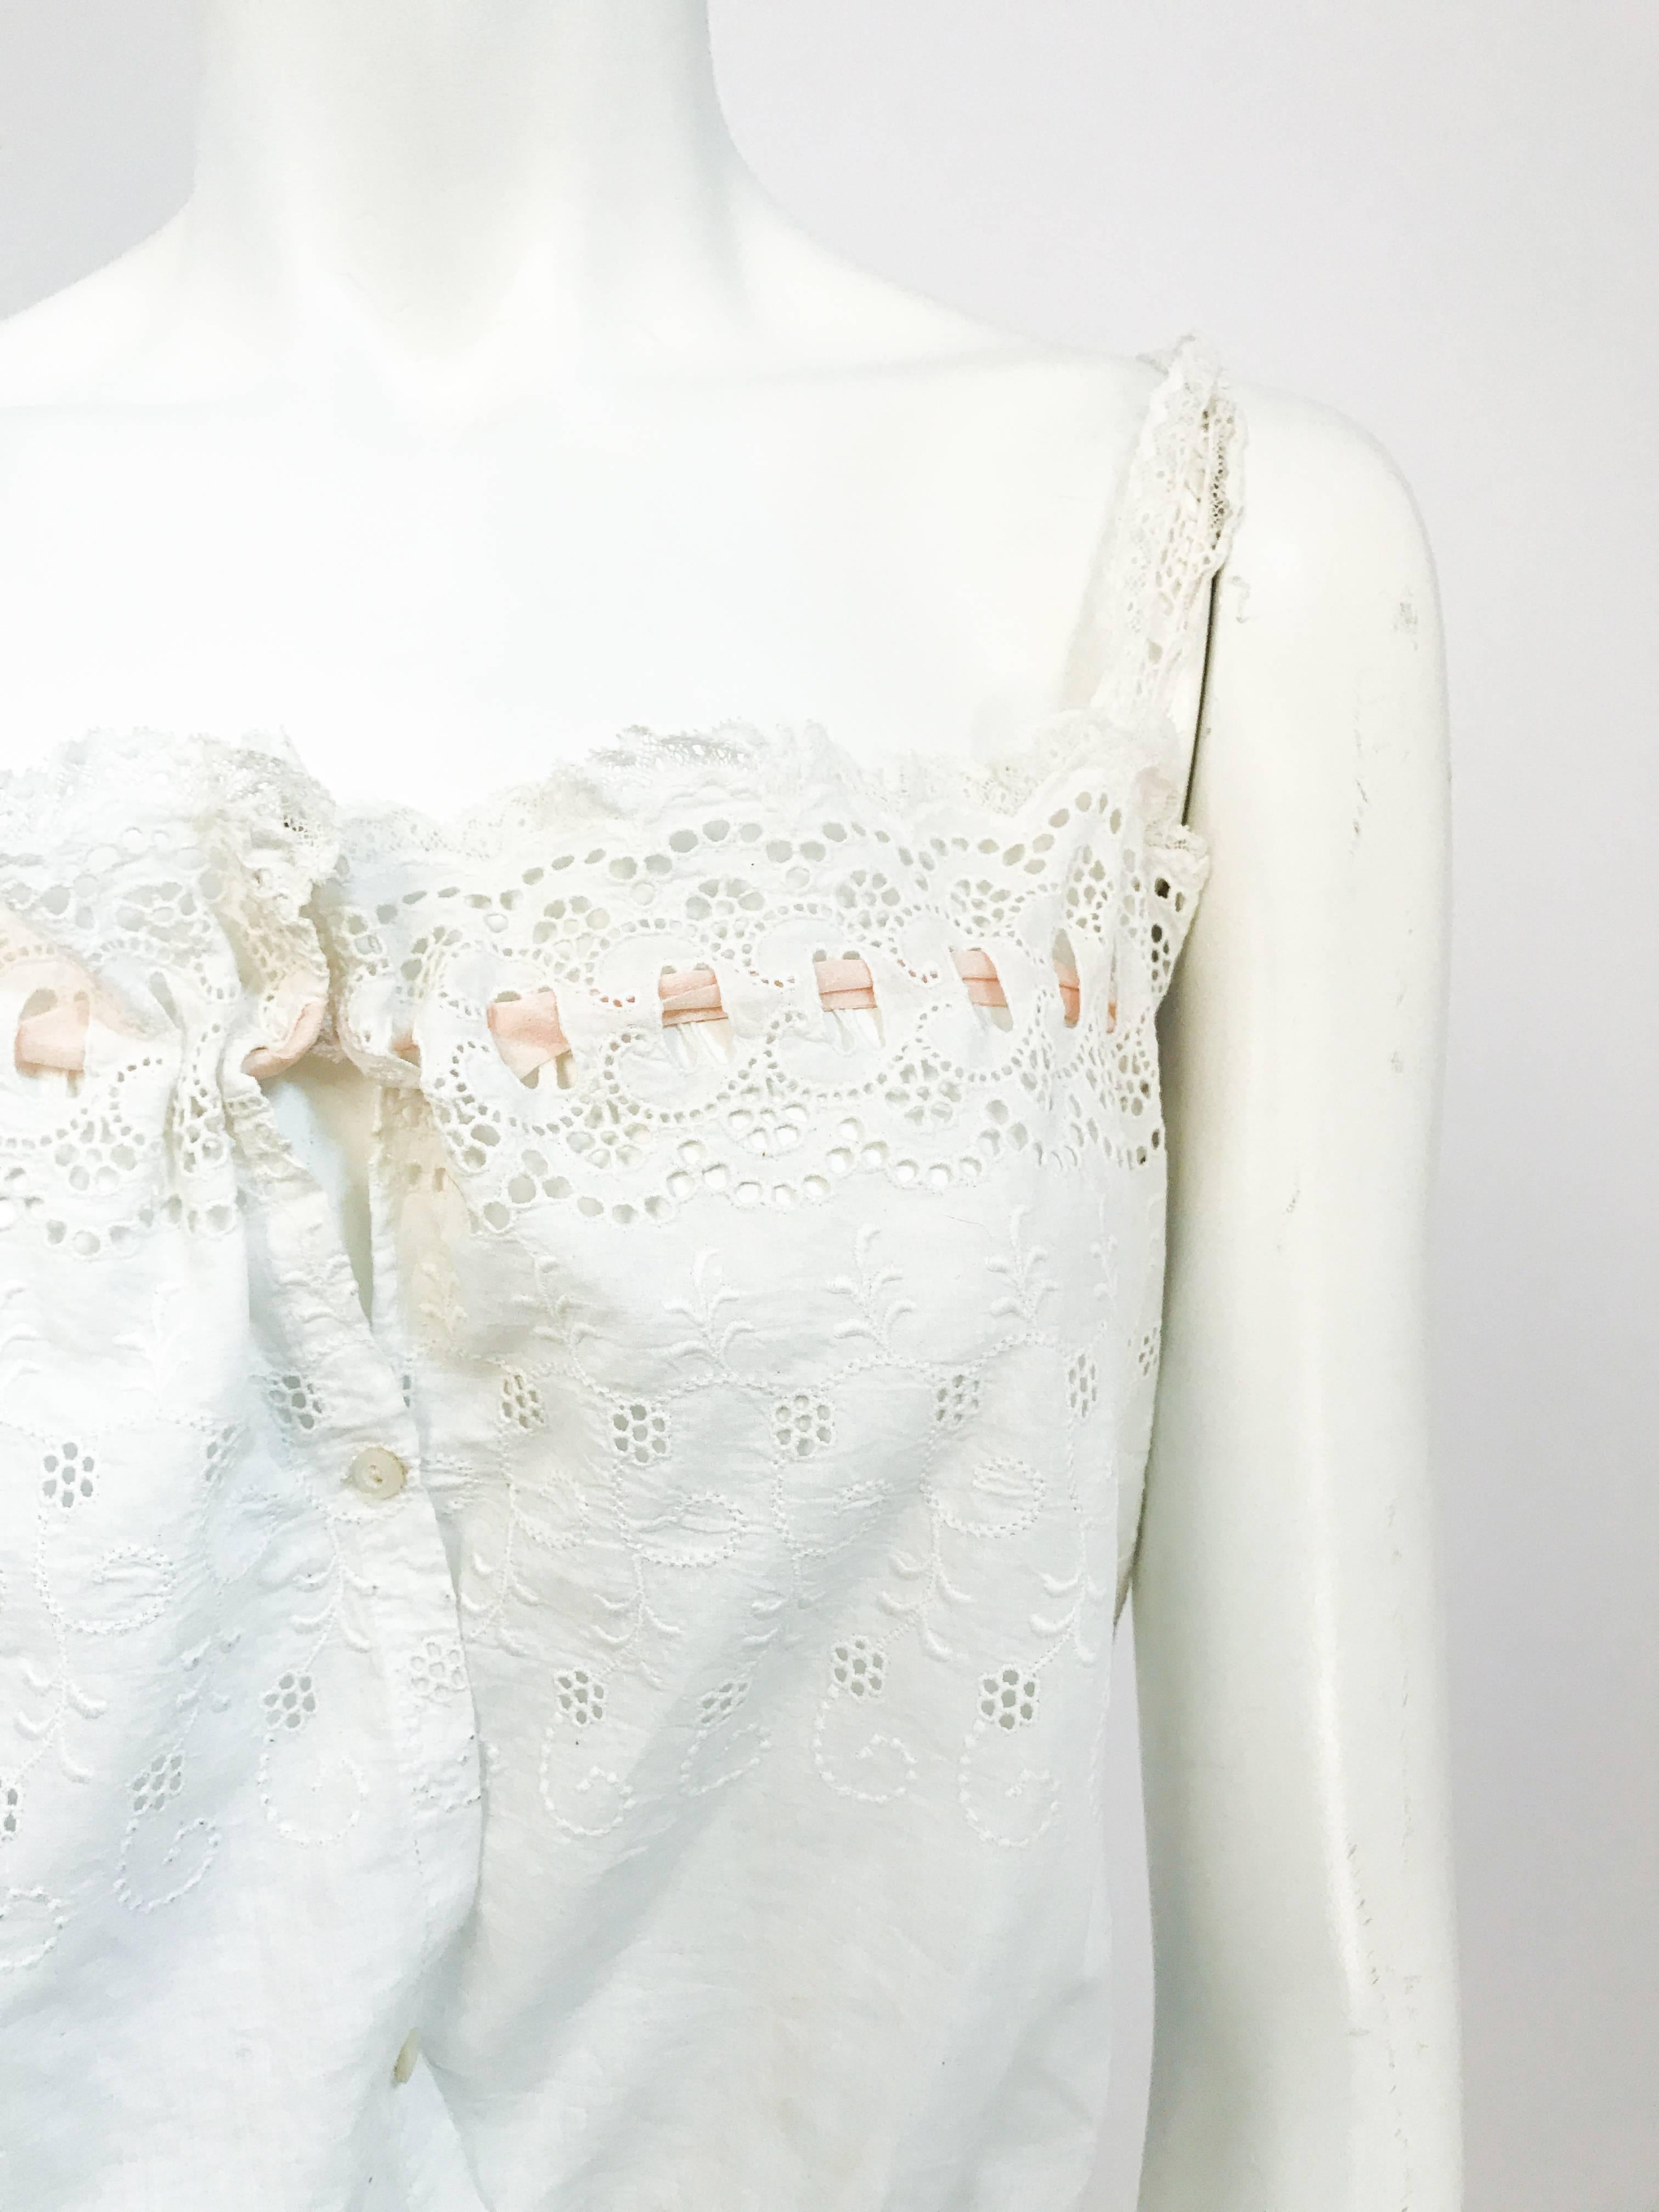 Edwardian white cotton eyelet corset top with with cut work along neckline and shoulder straps. Peach Ribbon strung though cutwork. Seashell button front closure